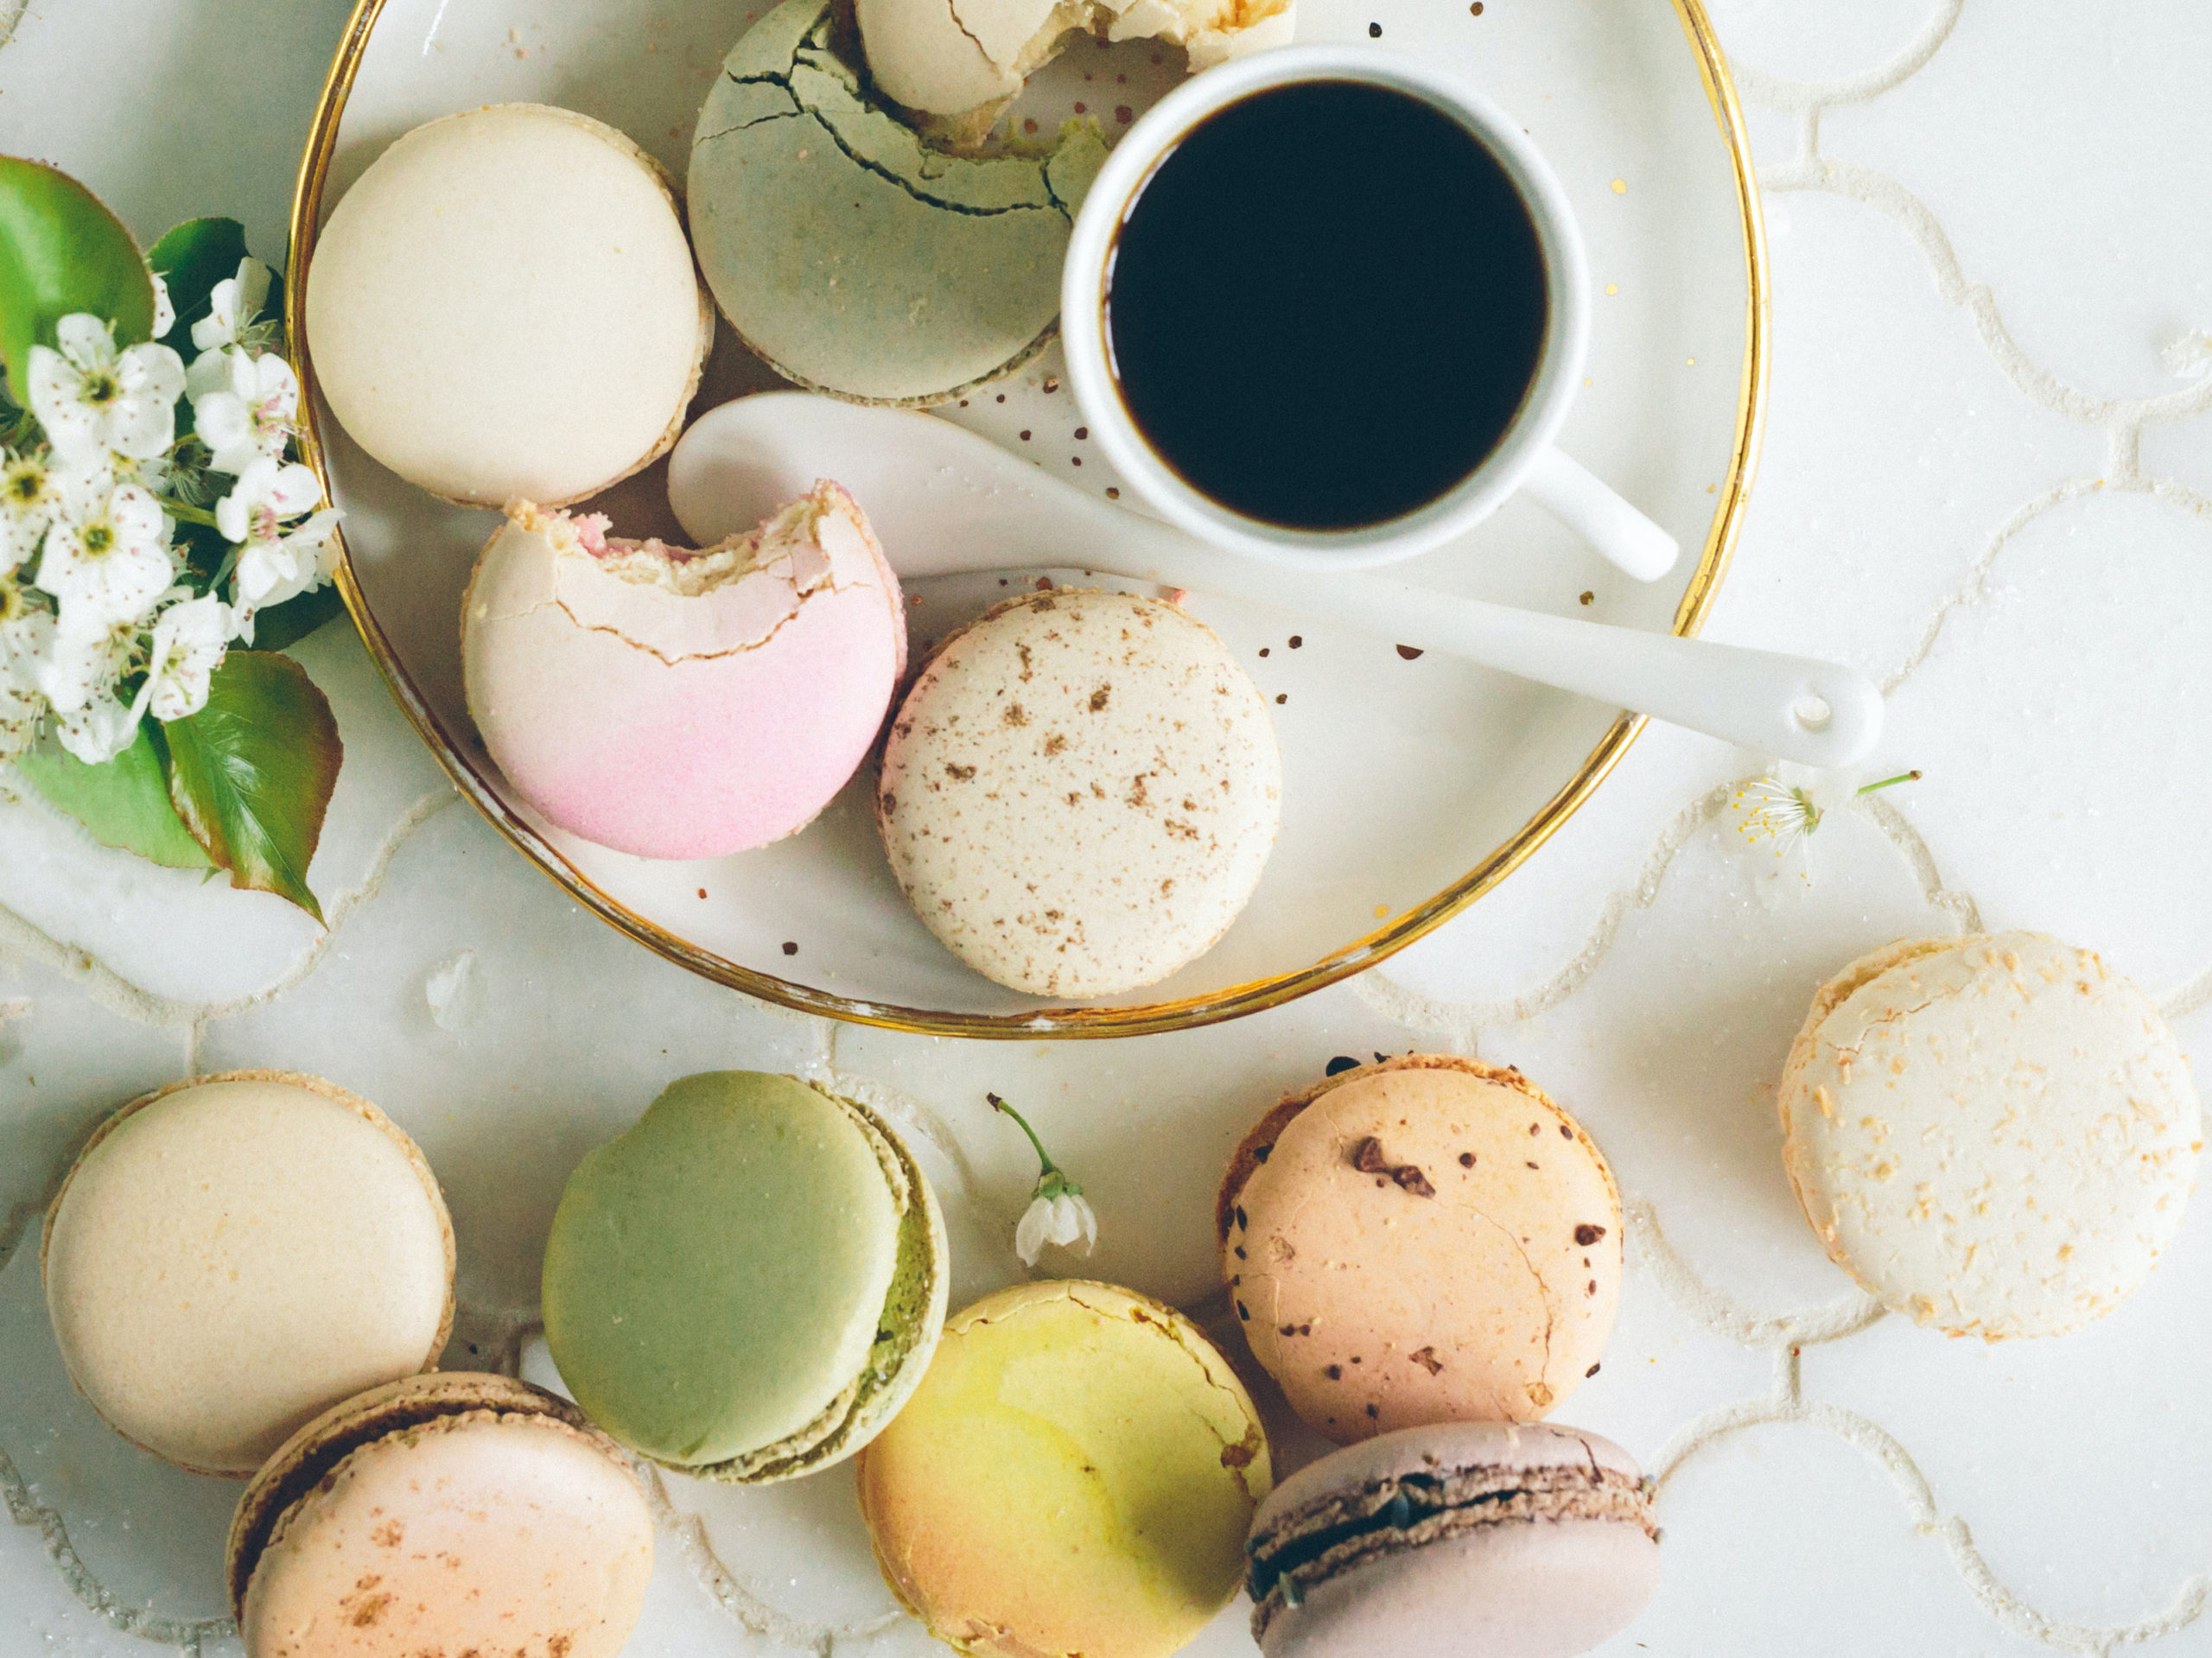 THIRTEEN TIPS HOW TO MAKE FRENCH MACARONS